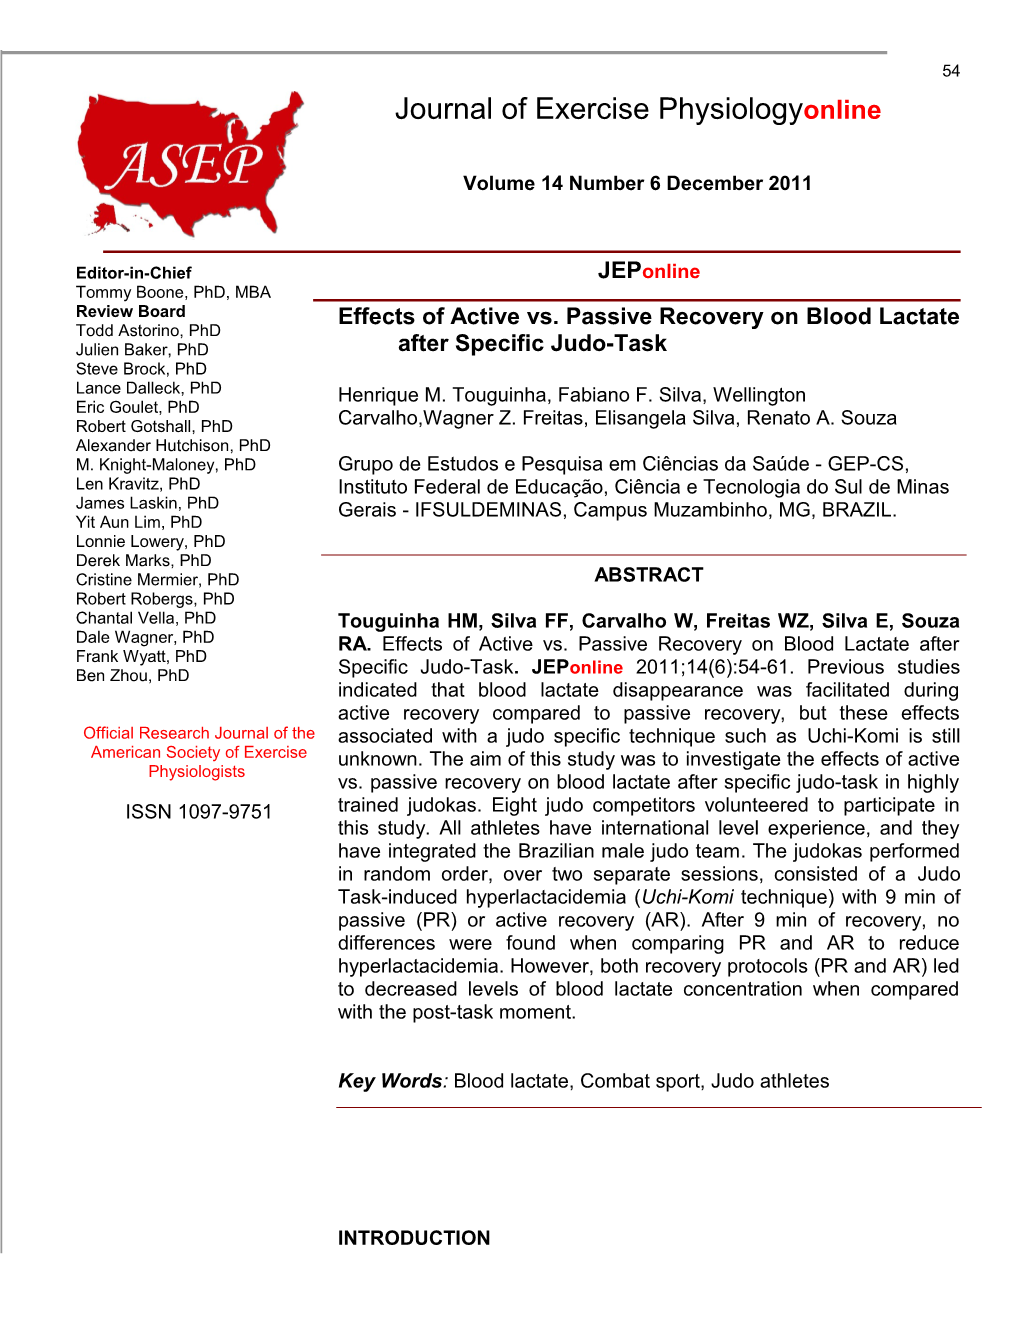 Effects of Active Vs. Passive Recovery on Blood Lactate After Specific Judo-Task